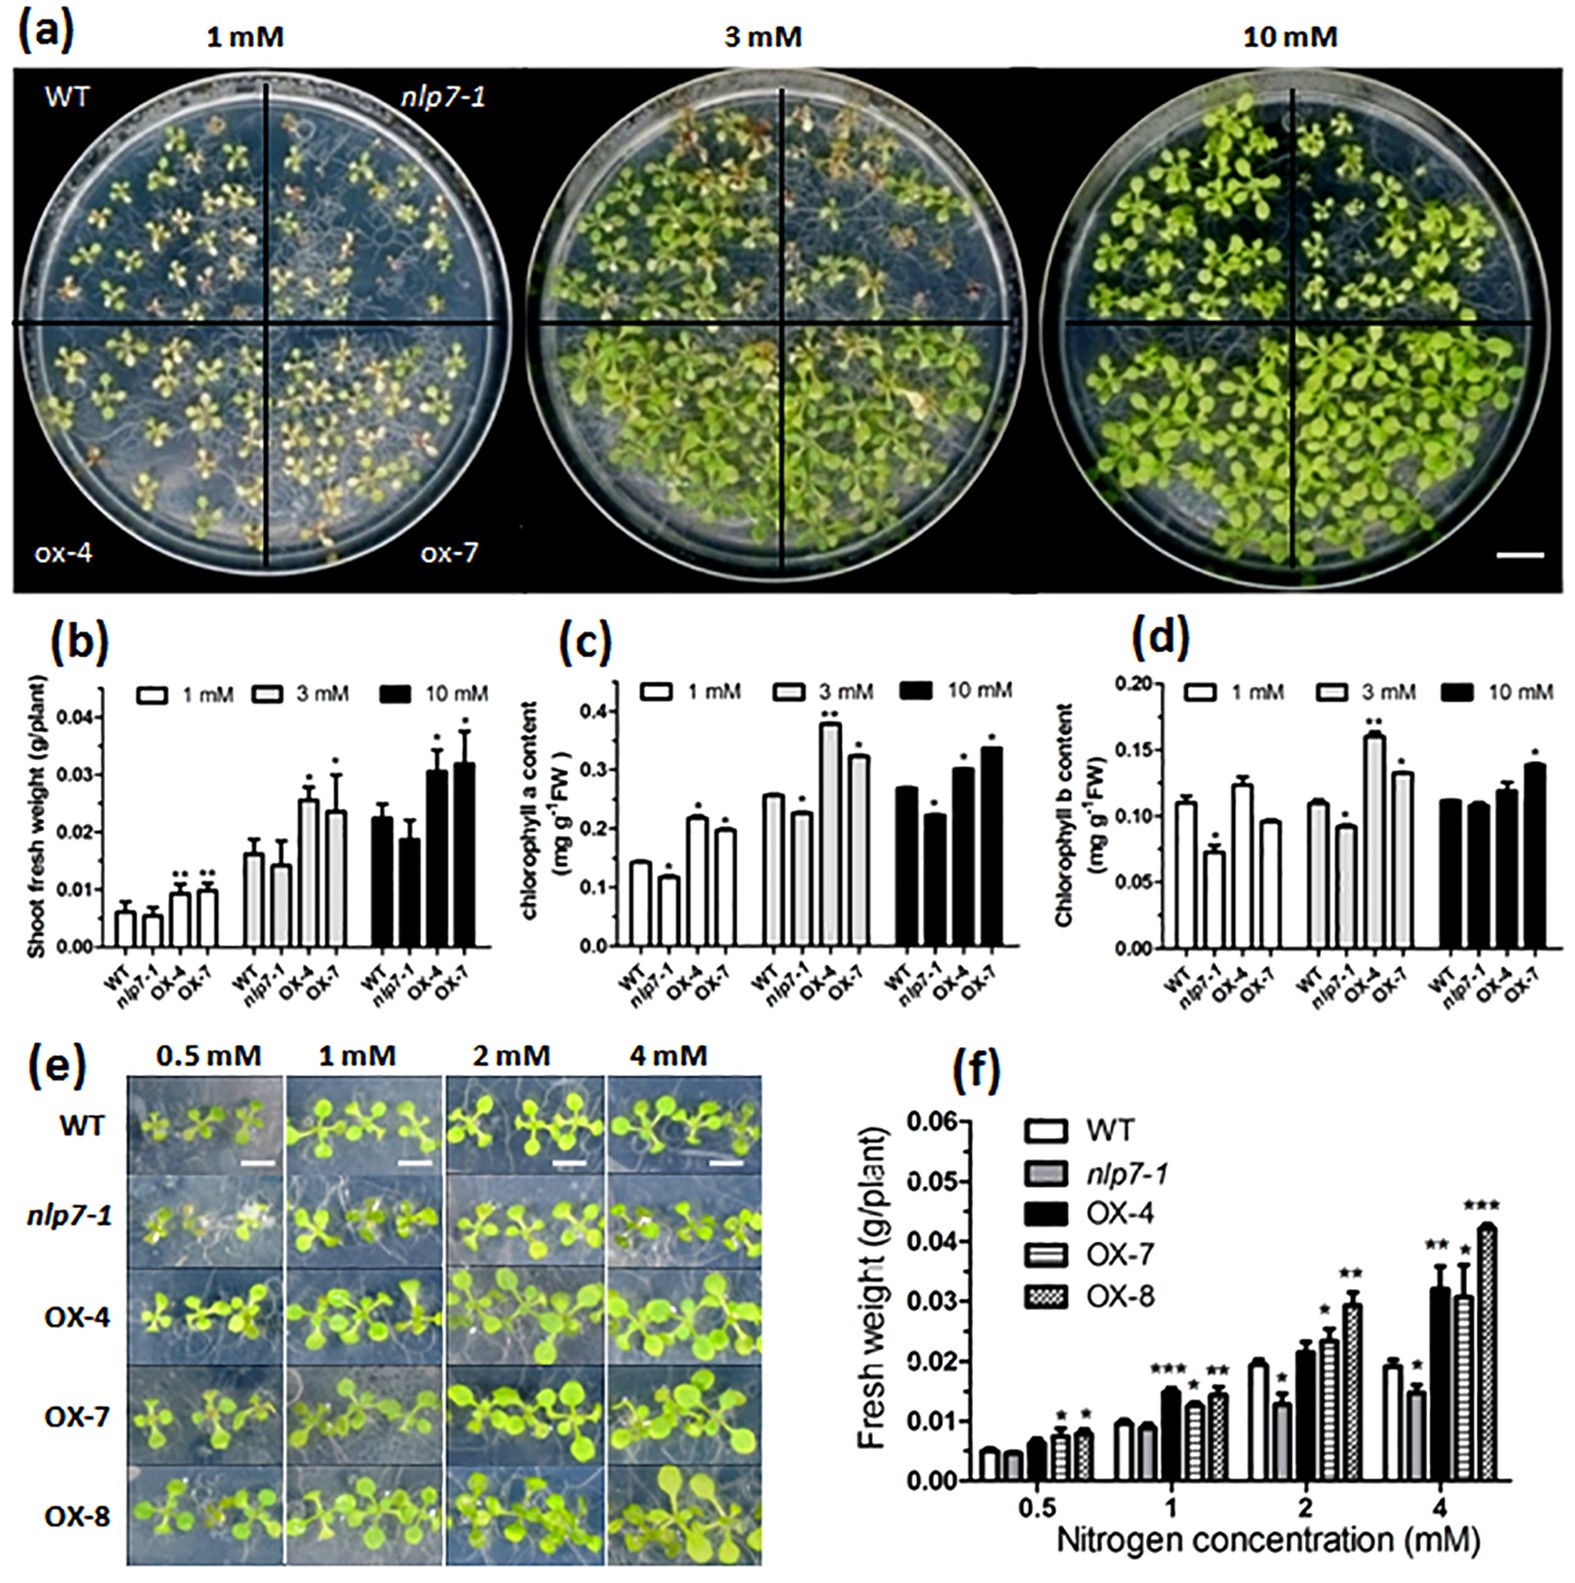 Overexpression of Arabidopsis NLP7 improves plant growth under both nitrogen-limiting  and -sufficient conditions by enhancing nitrogen and carbon assimilation |  Scientific Reports